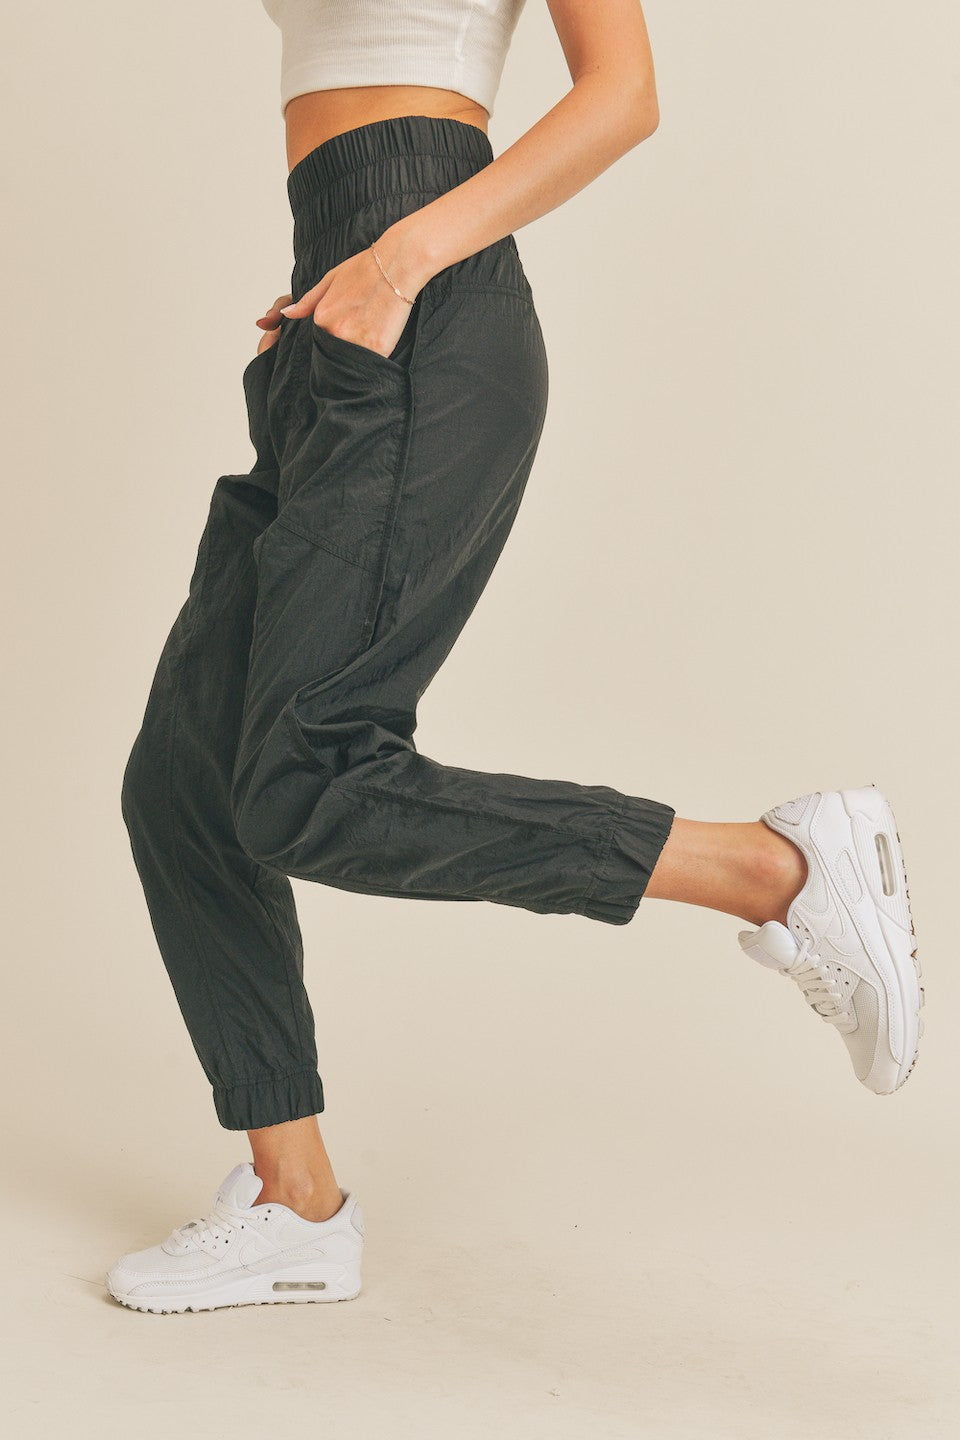 High Rise Warm-Up Style Jogger